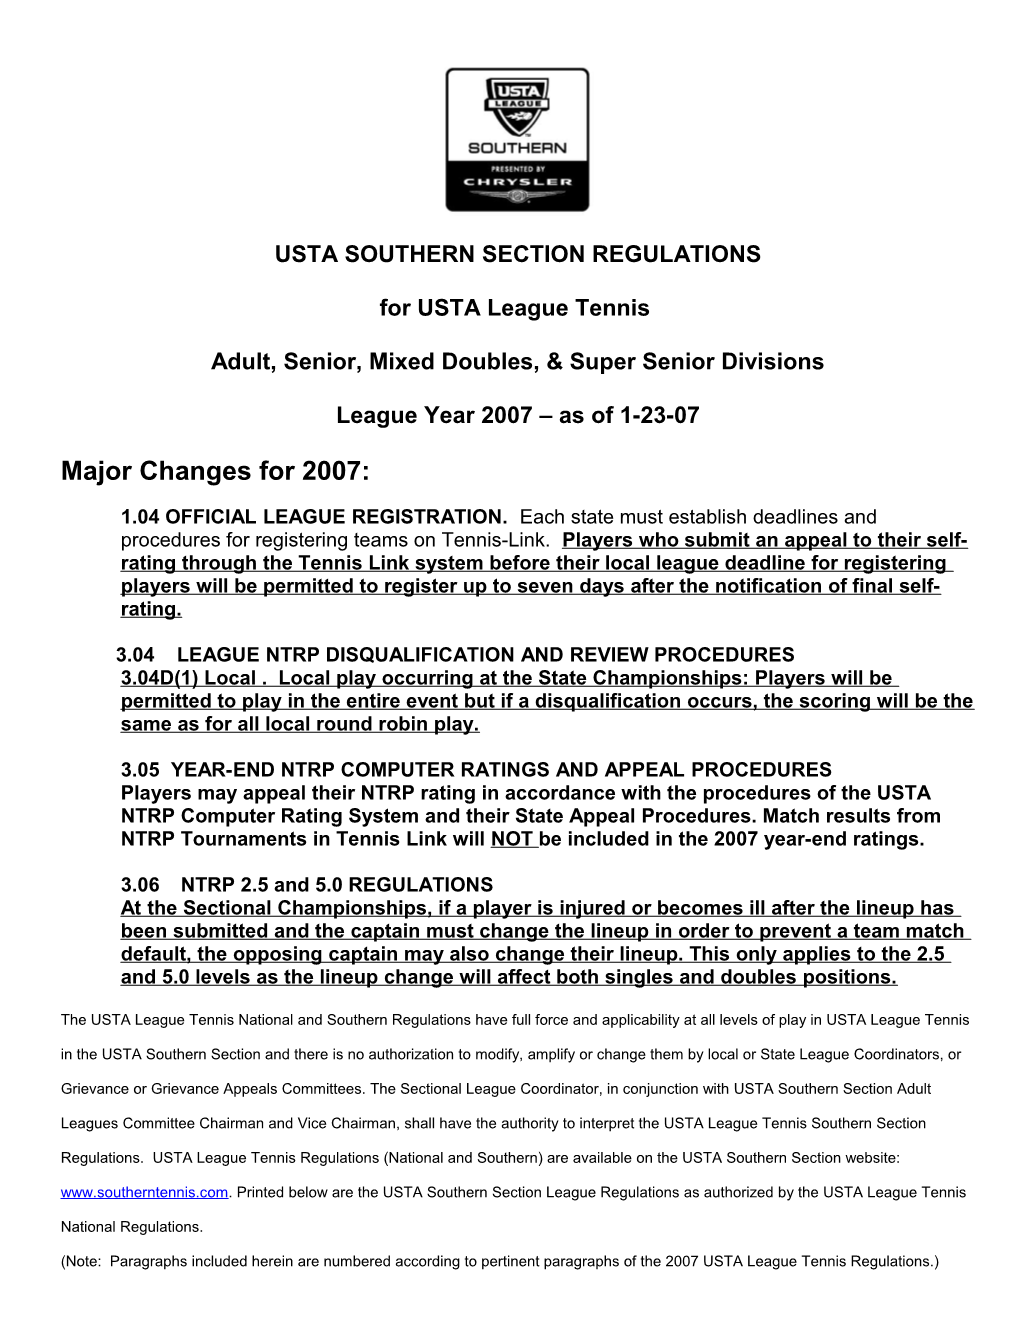 2001 Southern Section Regulations